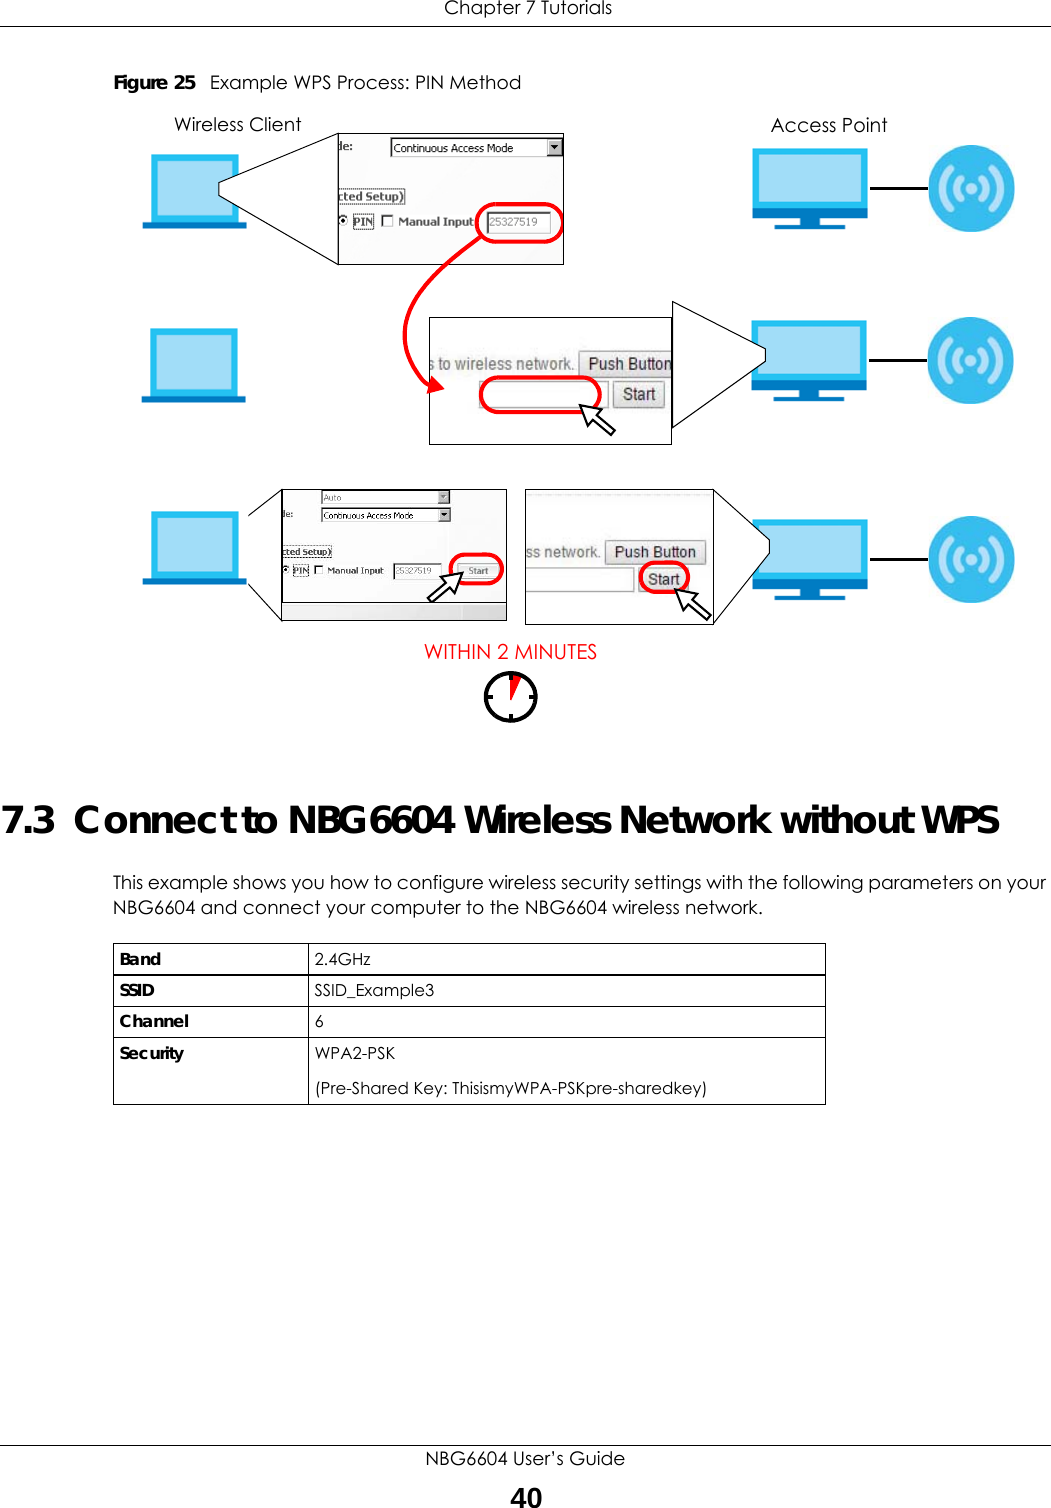  Chapter 7 TutorialsNBG6604 User’s Guide40Figure 25   Example WPS Process: PIN Method7.3  Connect to NBG6604 Wireless Network without WPSThis example shows you how to configure wireless security settings with the following parameters on your NBG6604 and connect your computer to the NBG6604 wireless network.WITHIN 2 MINUTESWireless ClientAccess PointBand 2.4GHzSSID SSID_Example3Channel 6Security  WPA2-PSK(Pre-Shared Key: ThisismyWPA-PSKpre-sharedkey)